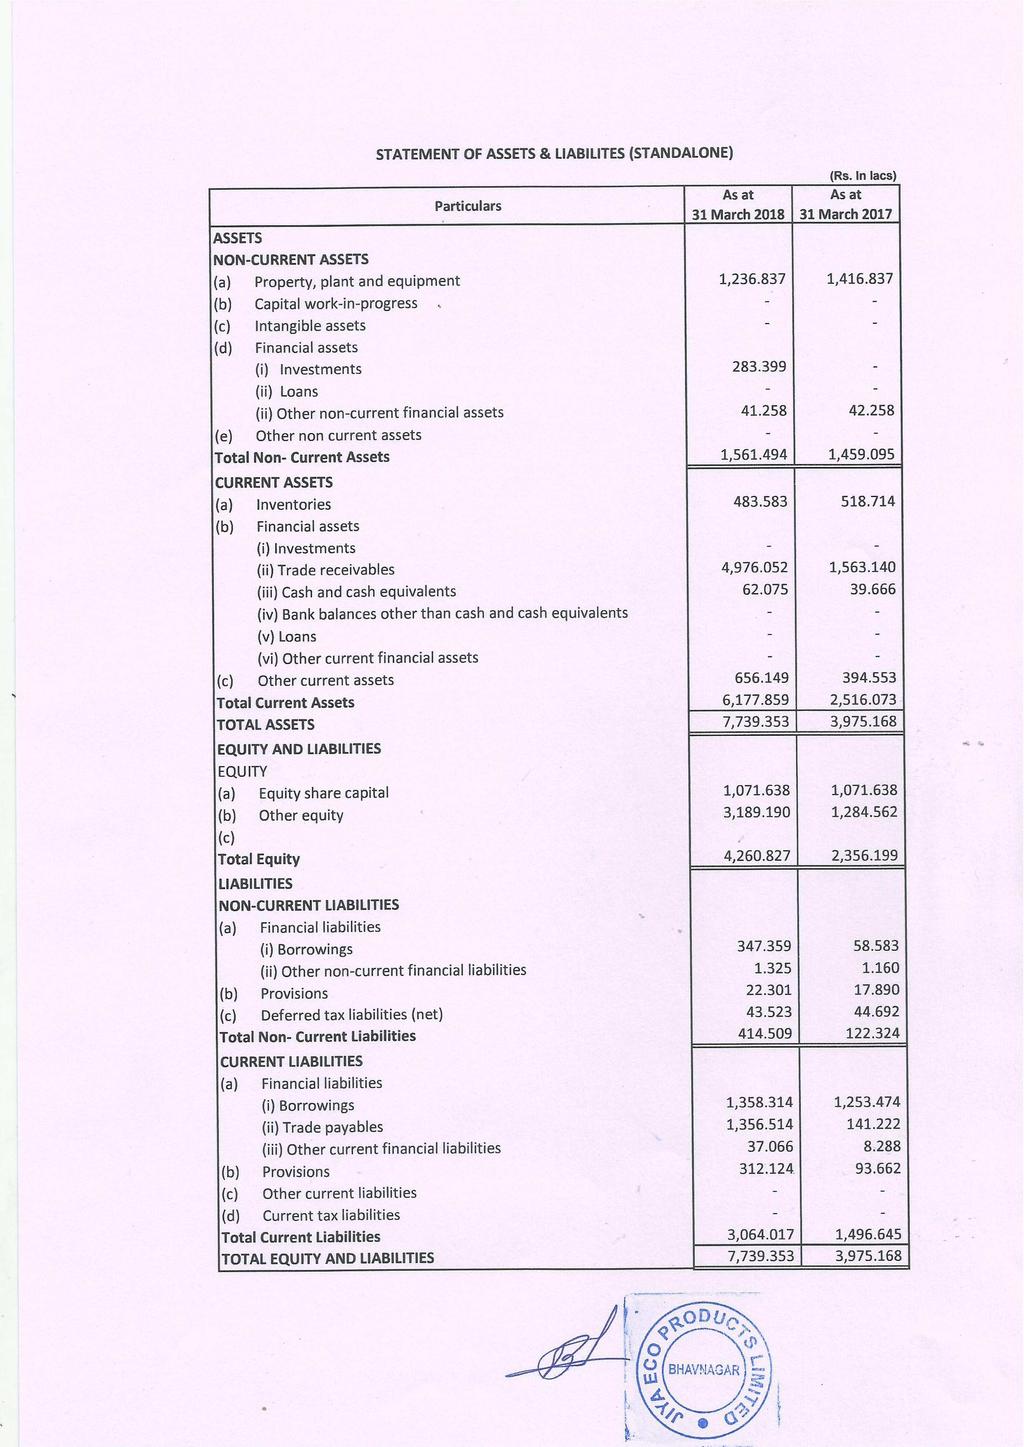 , 31 STATEMENT OF ASSETS & LIABILITES (STANDALONE) Particulars (Rs. In lacs) A5 at AS at March 2018 31 March 2017 ASSETS NONCURRENT ASSETS (a) Property, plant and equipment 1,236.837 1,416.